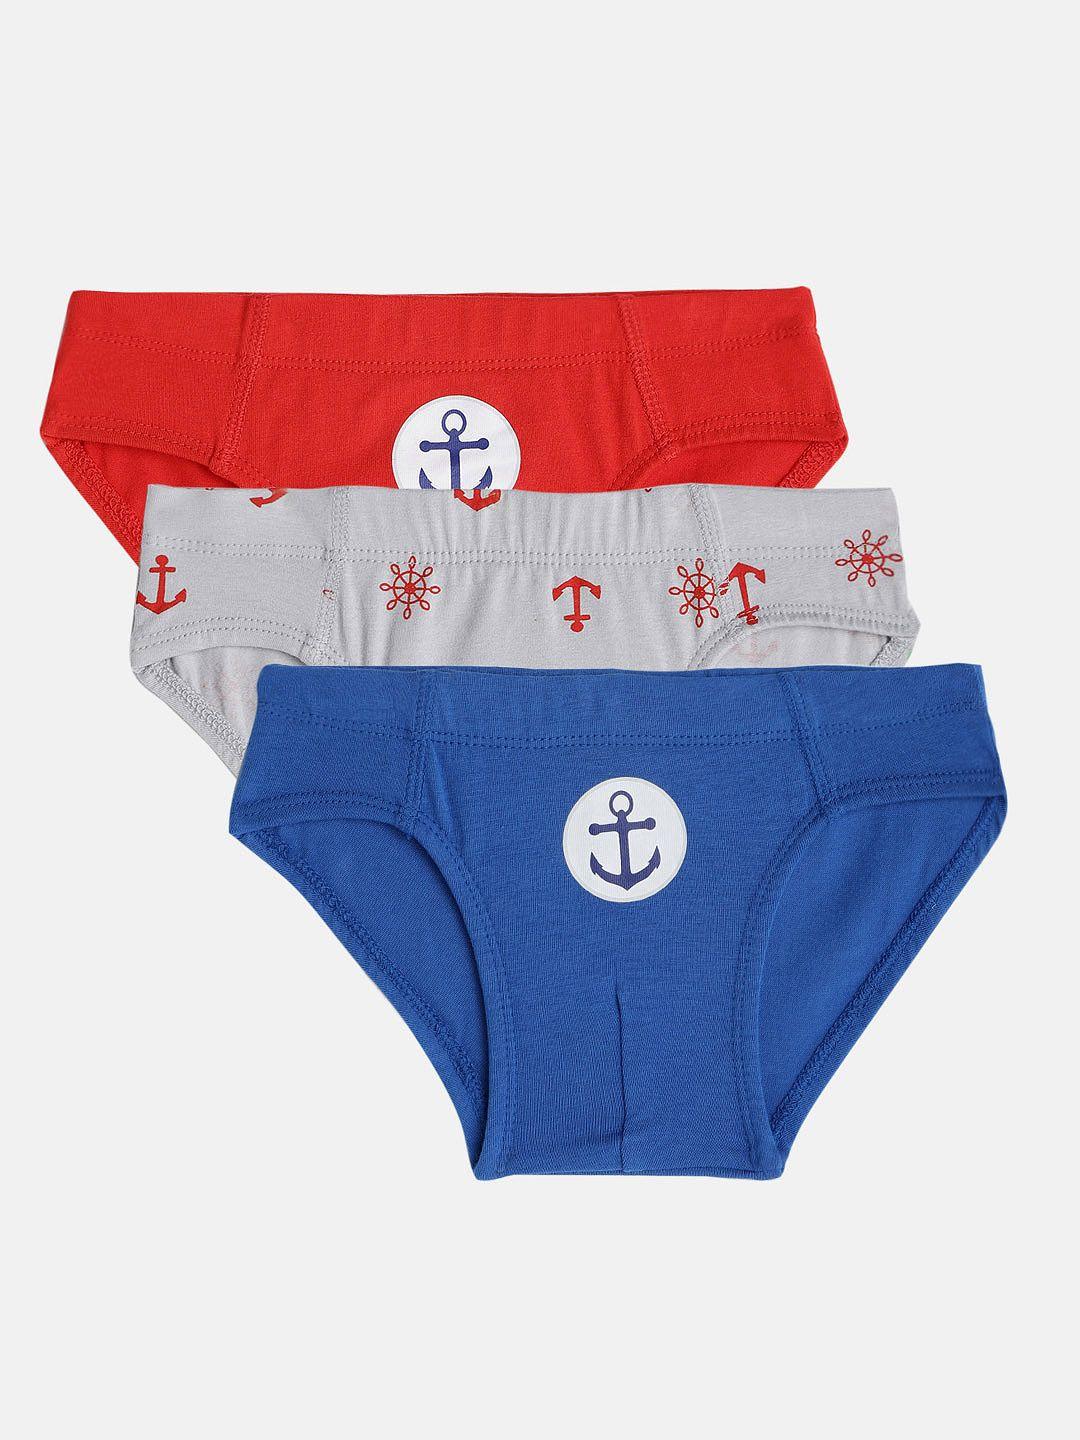 mackly boys pack of 3 briefs mb-11-2-4yrs